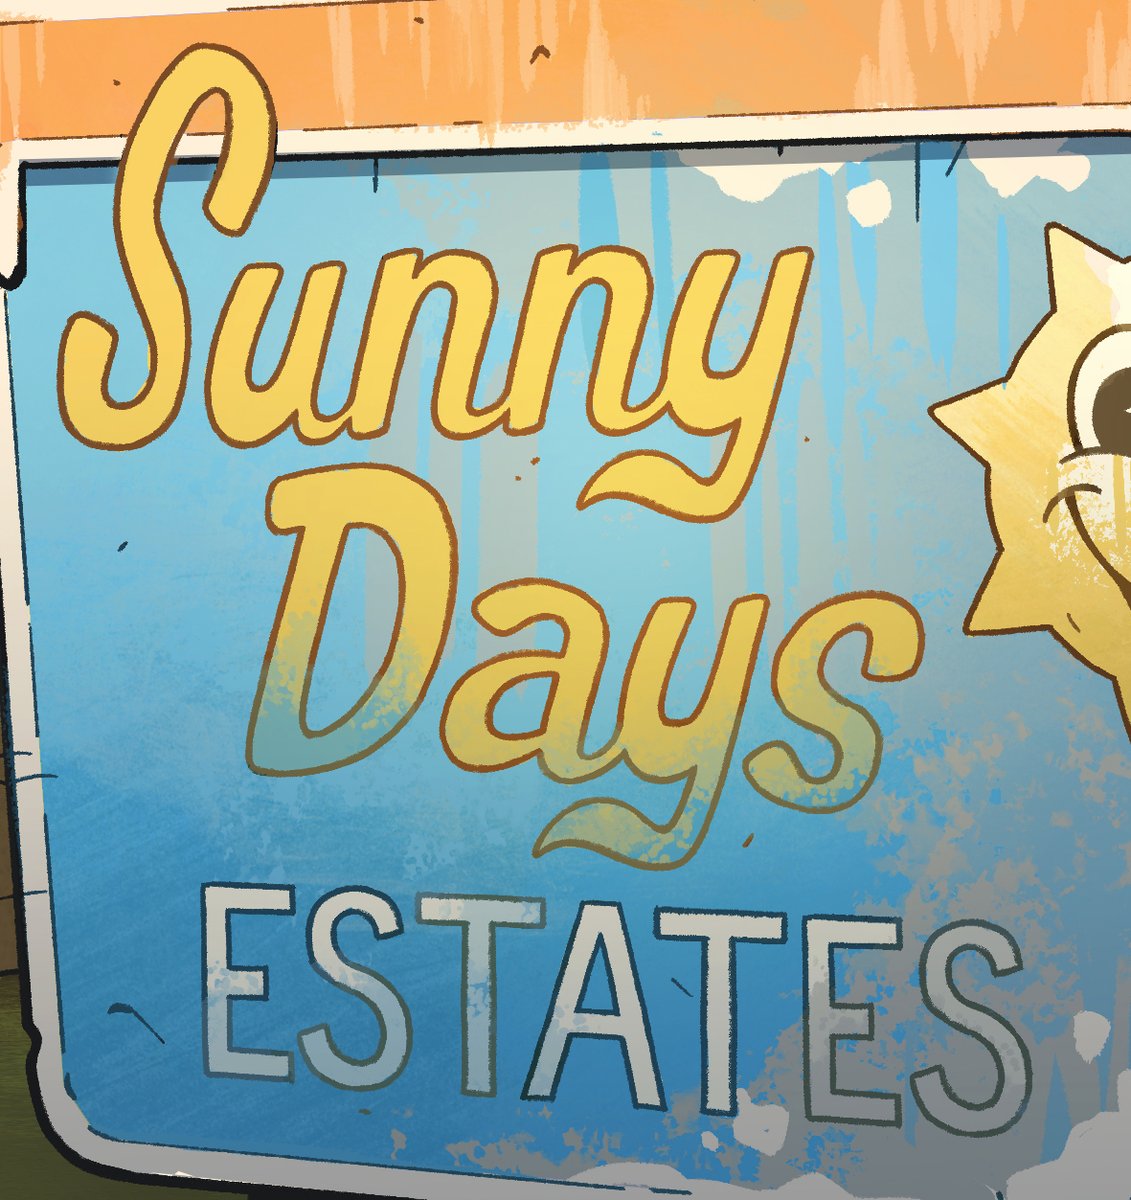 Typography matters.A happy soft typeface of "Sunny Days" contrasts the standard looking seriousness of "Estates" in all-caps, neither of which reflect the reality of the trailer park.The warm yellow is worn away to reveal the cold blue beneath.